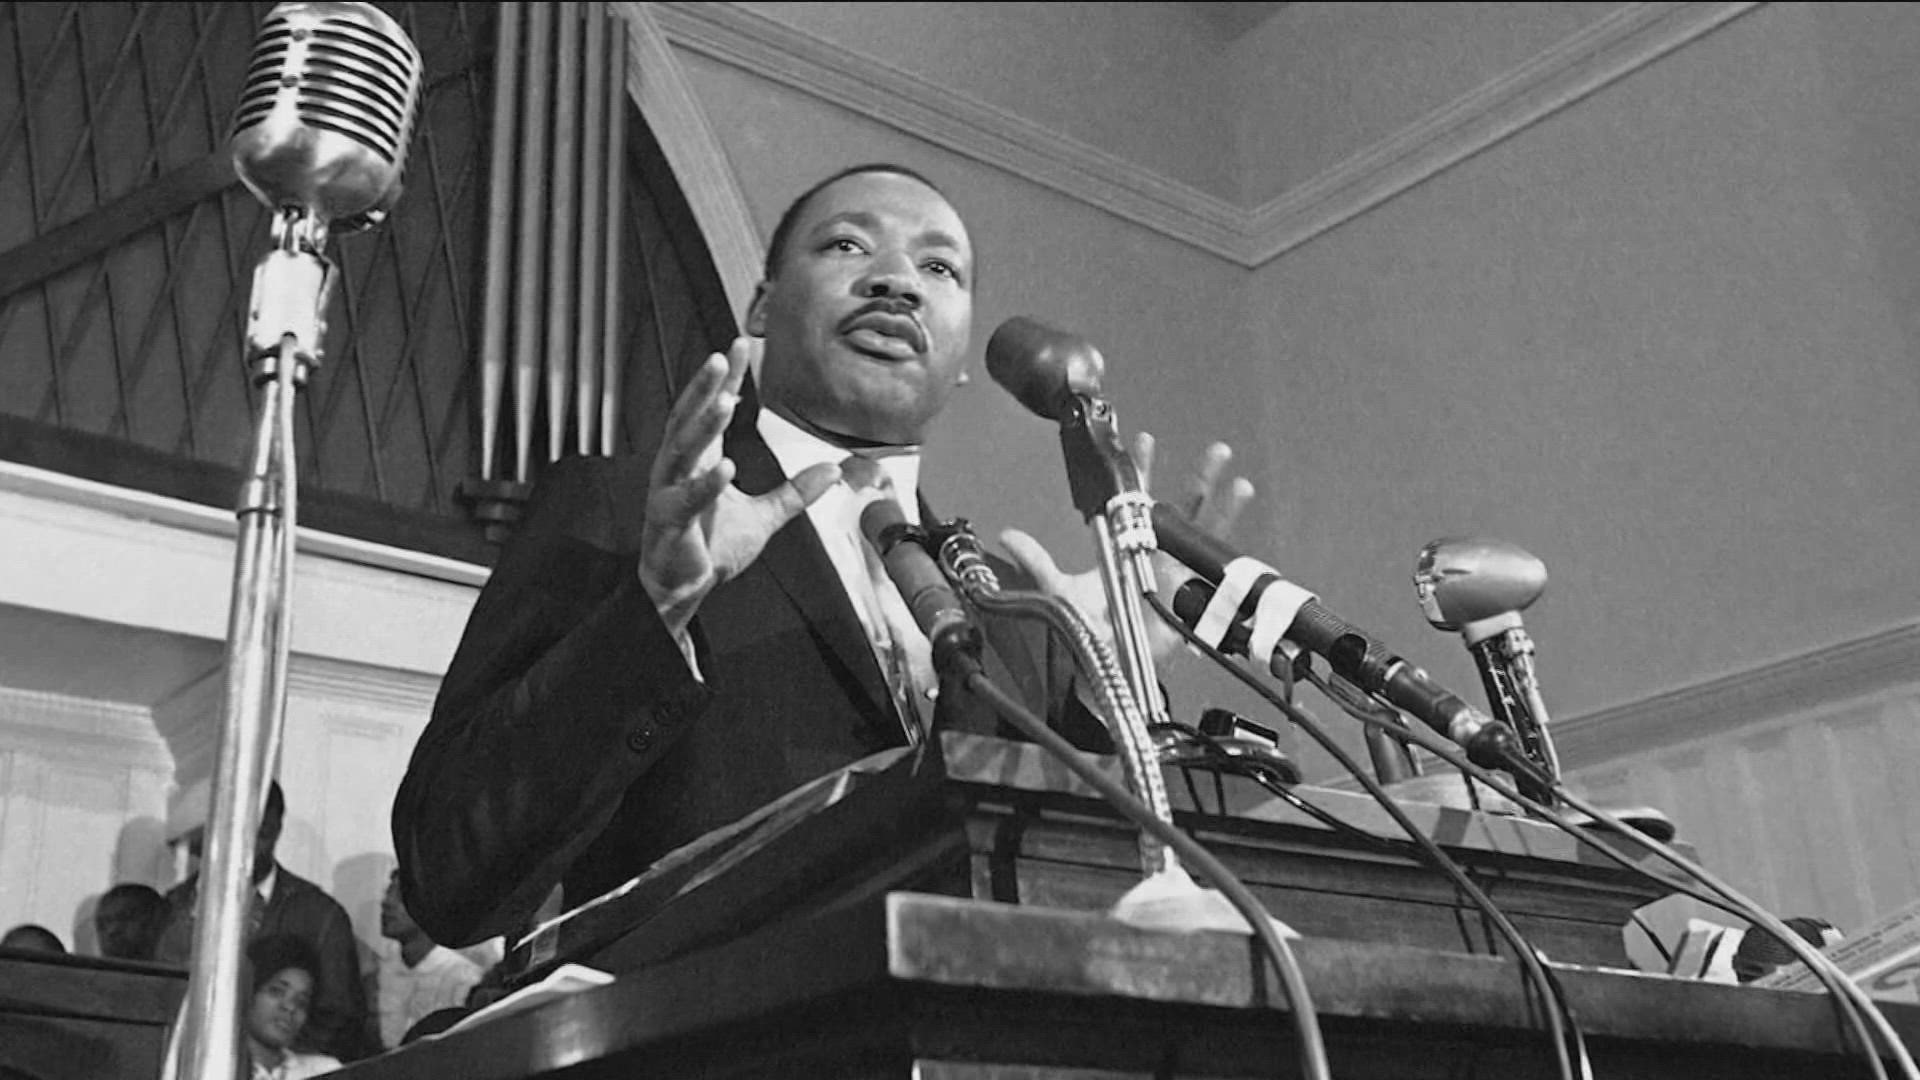 Jan. 15, 2023, would have been Dr. Martin Luther King Jr.'s 94th birthday. KVUE spoke with a historian about Dr. King's legacy.